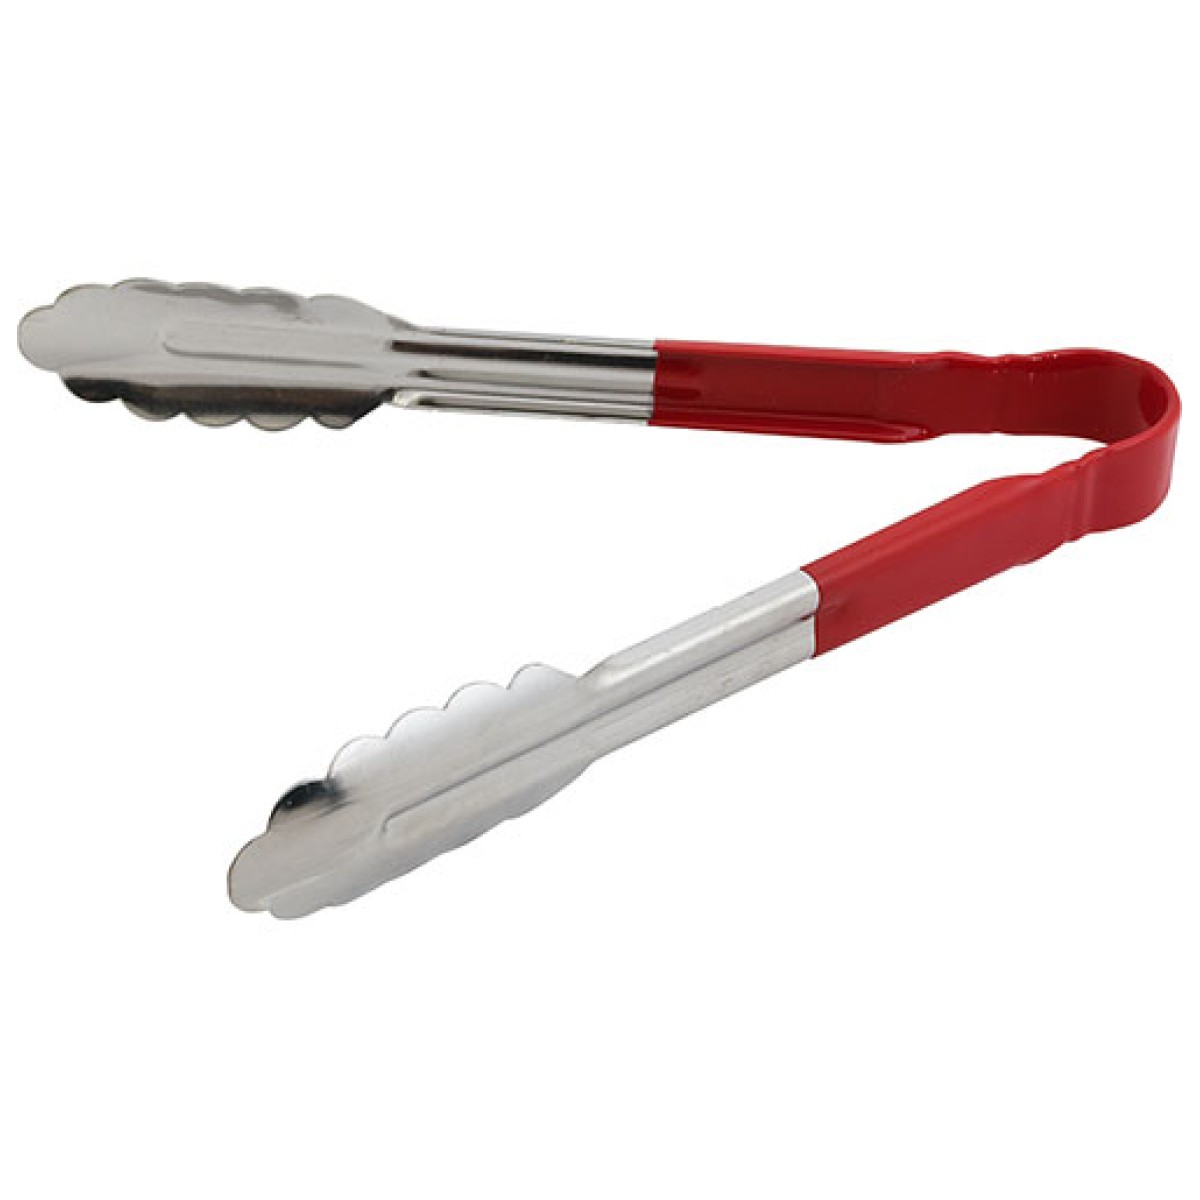 TONGS - 230mm S S PLASTIC H GRIP RED